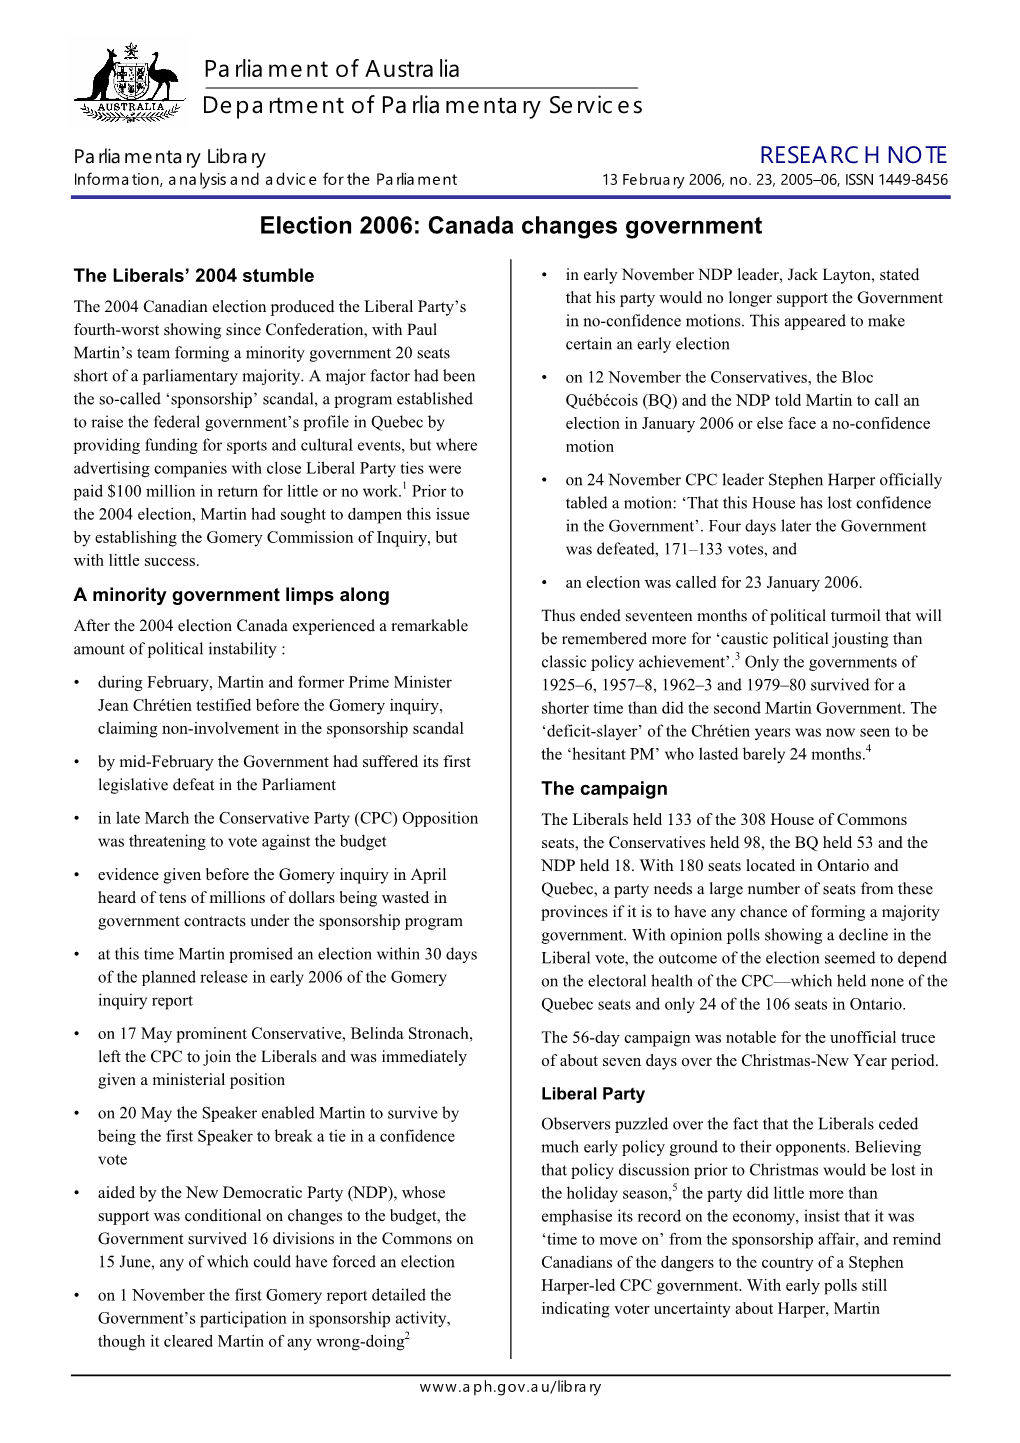 Election 2006: Canada Changes Government